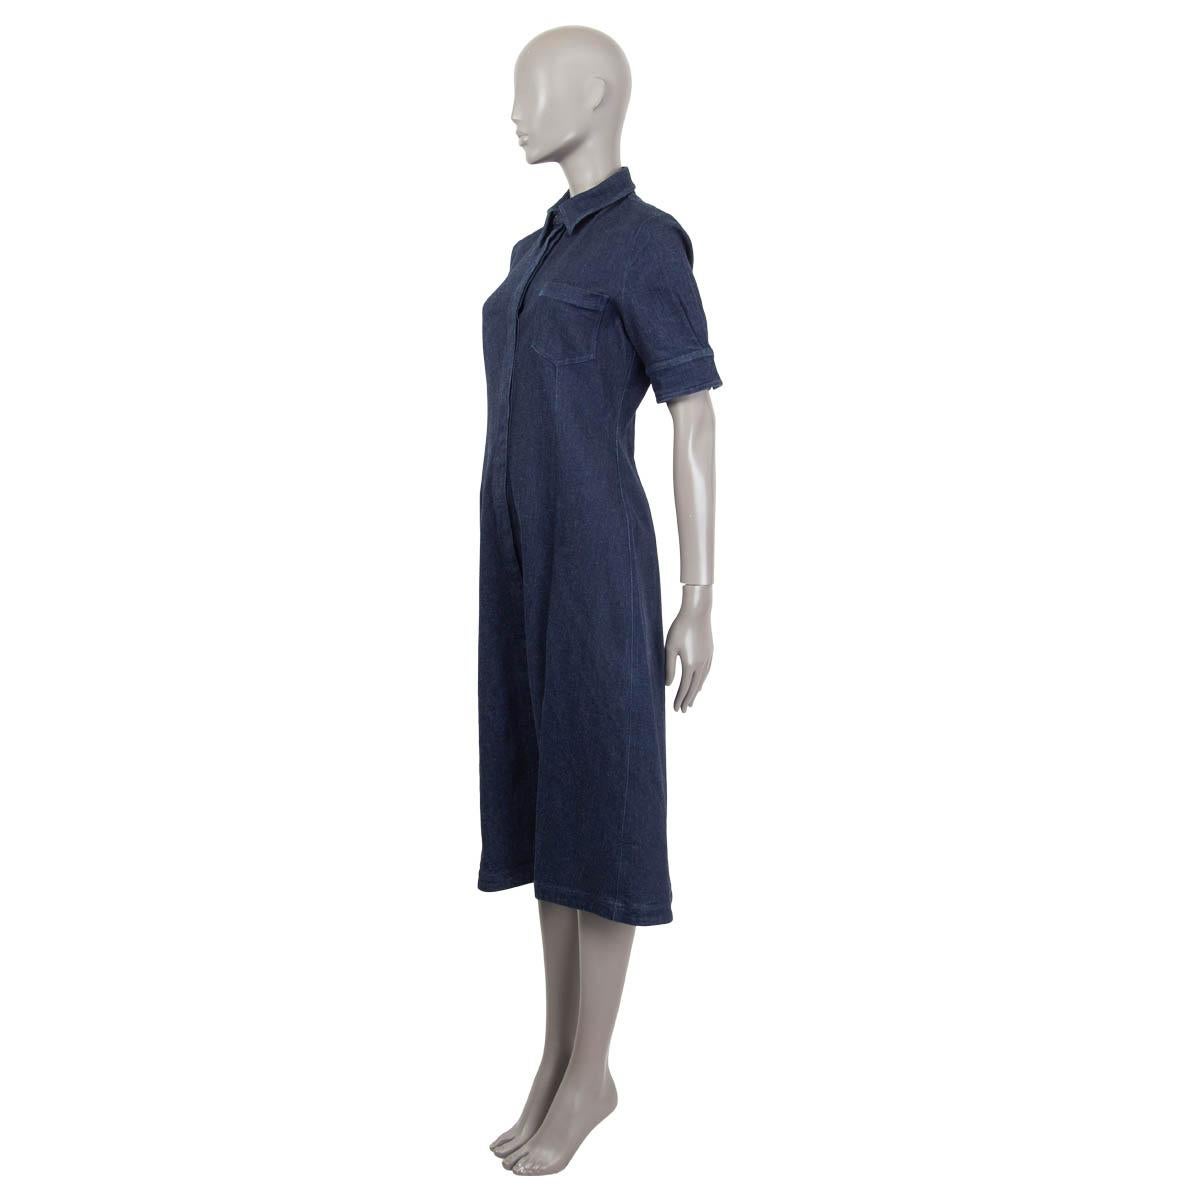 100% authentic Altuzarra 'Kieran' denim shirt dress in berry blue cotton (98%) and elastane (2%). Features a patch pocket and a slit on the front. Opens with eleven buttons on the front. Semi-lined in navy polyester (100%). Detachable belt is